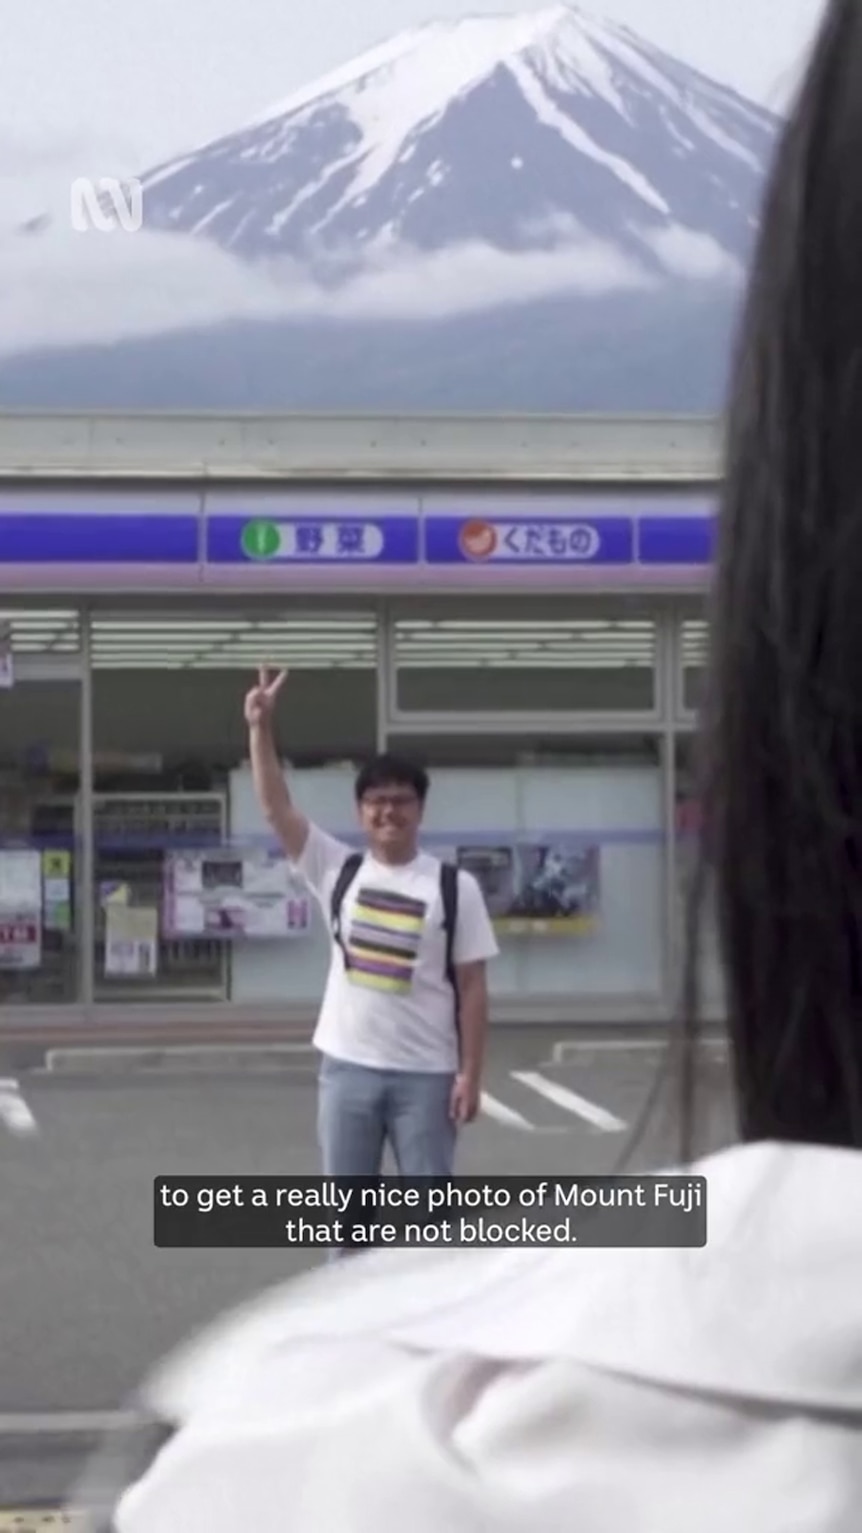 An Asian man flashes the peace sign in front of a storefront with a prominent snow-capped mountain visible in the background